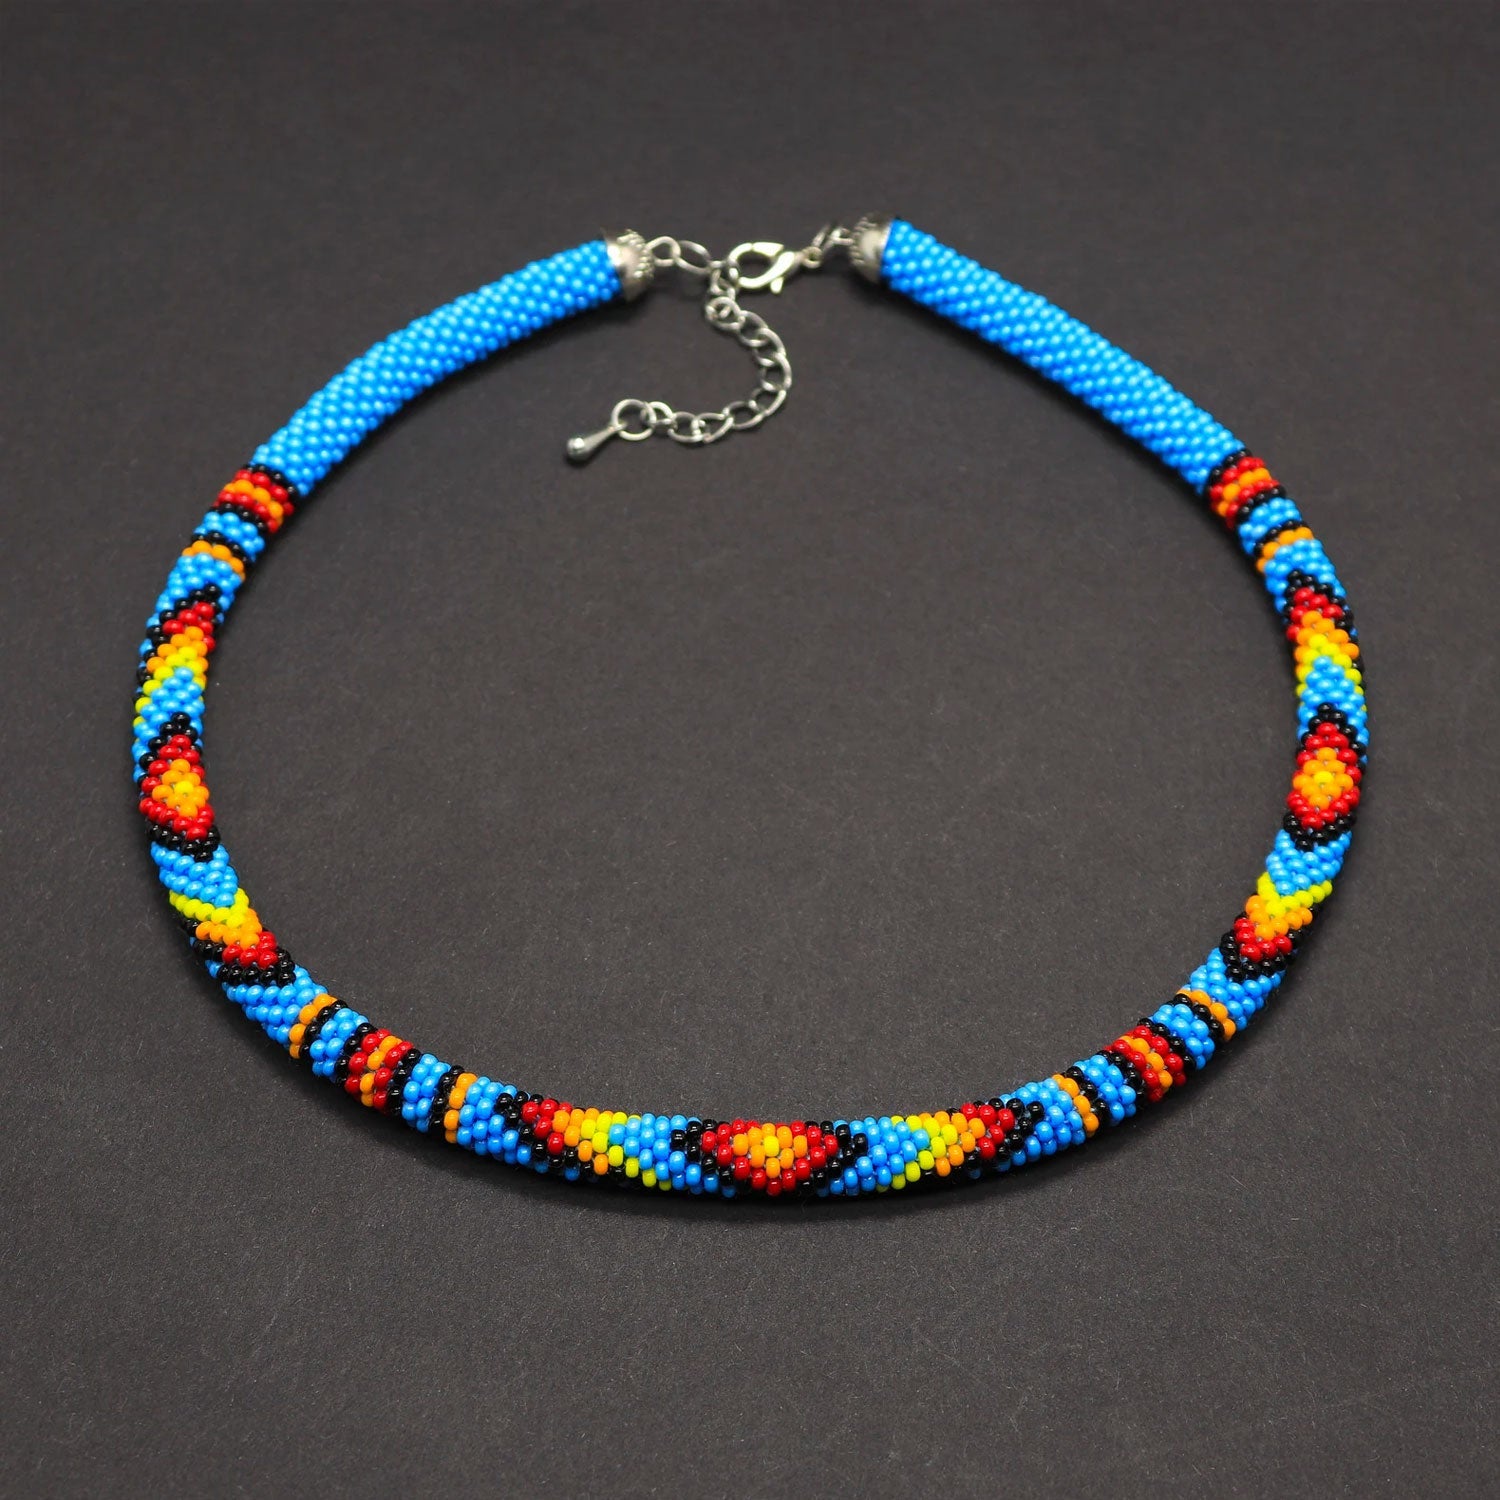 SALE 50% OFF - Inspired Beaded Handmade Necklace Unisex With Native American Style